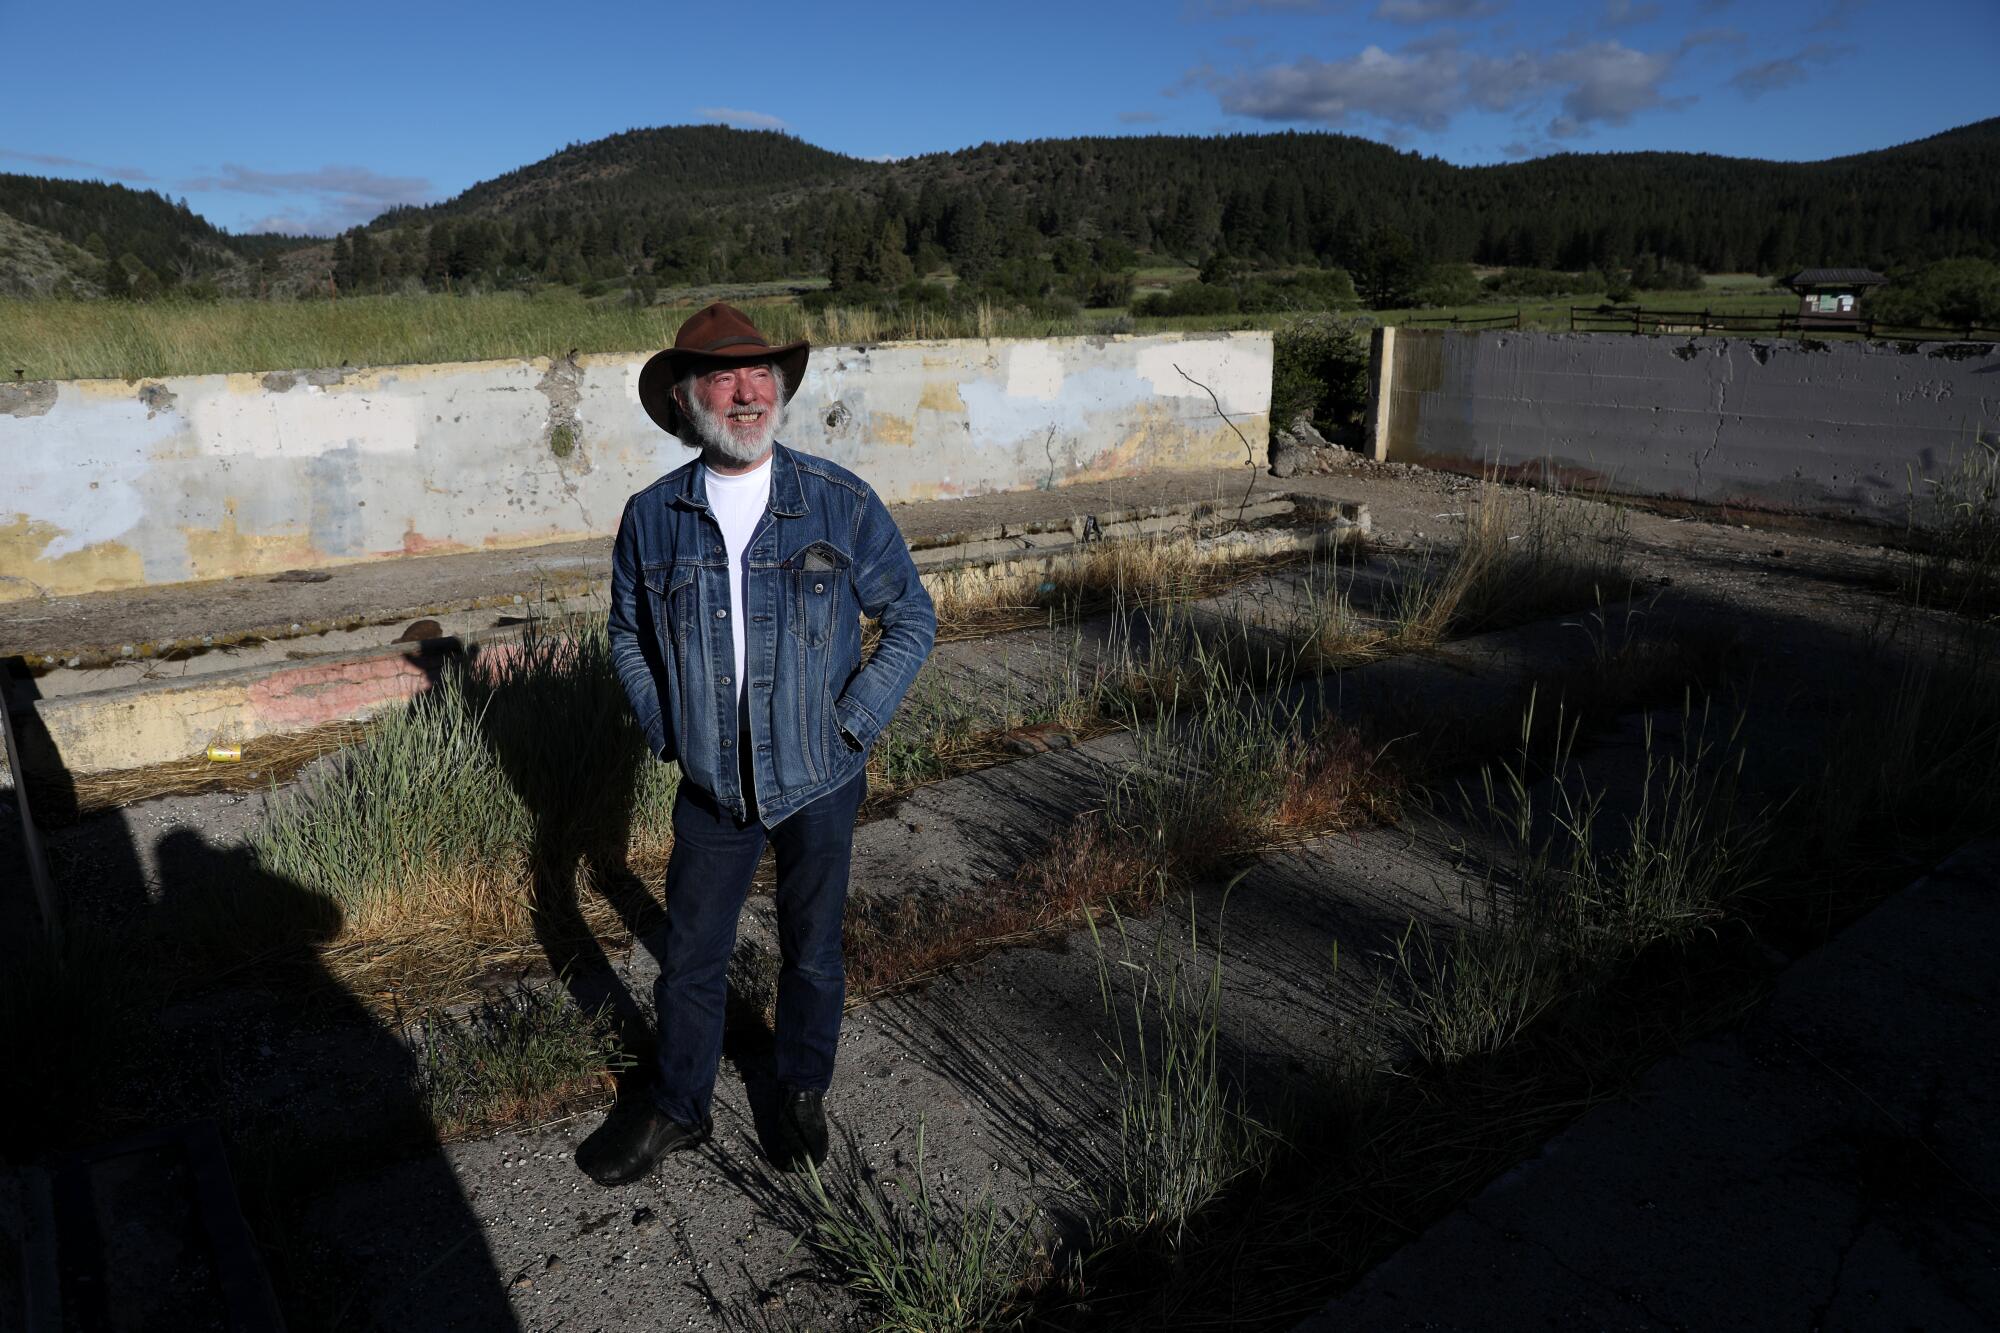 A man in a cowboy hat, beard and denim jacket stands in a grassy area surrounded by low walls.